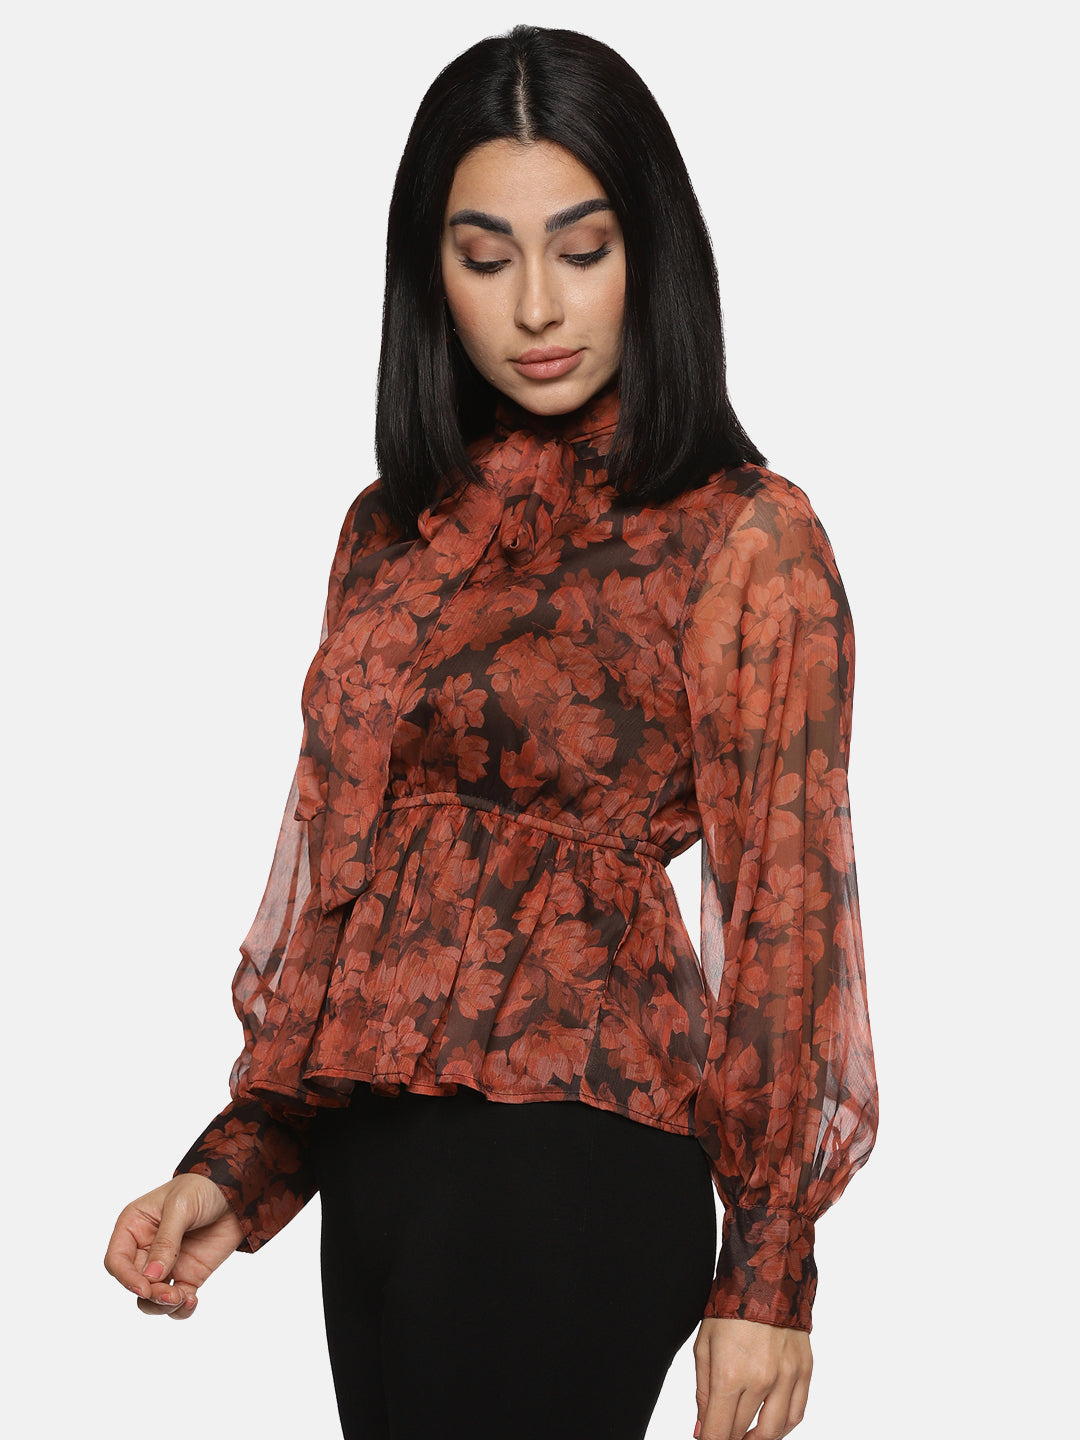 Buy Floral Brown Front Tie Knot Peplum Top For Women at Best Price